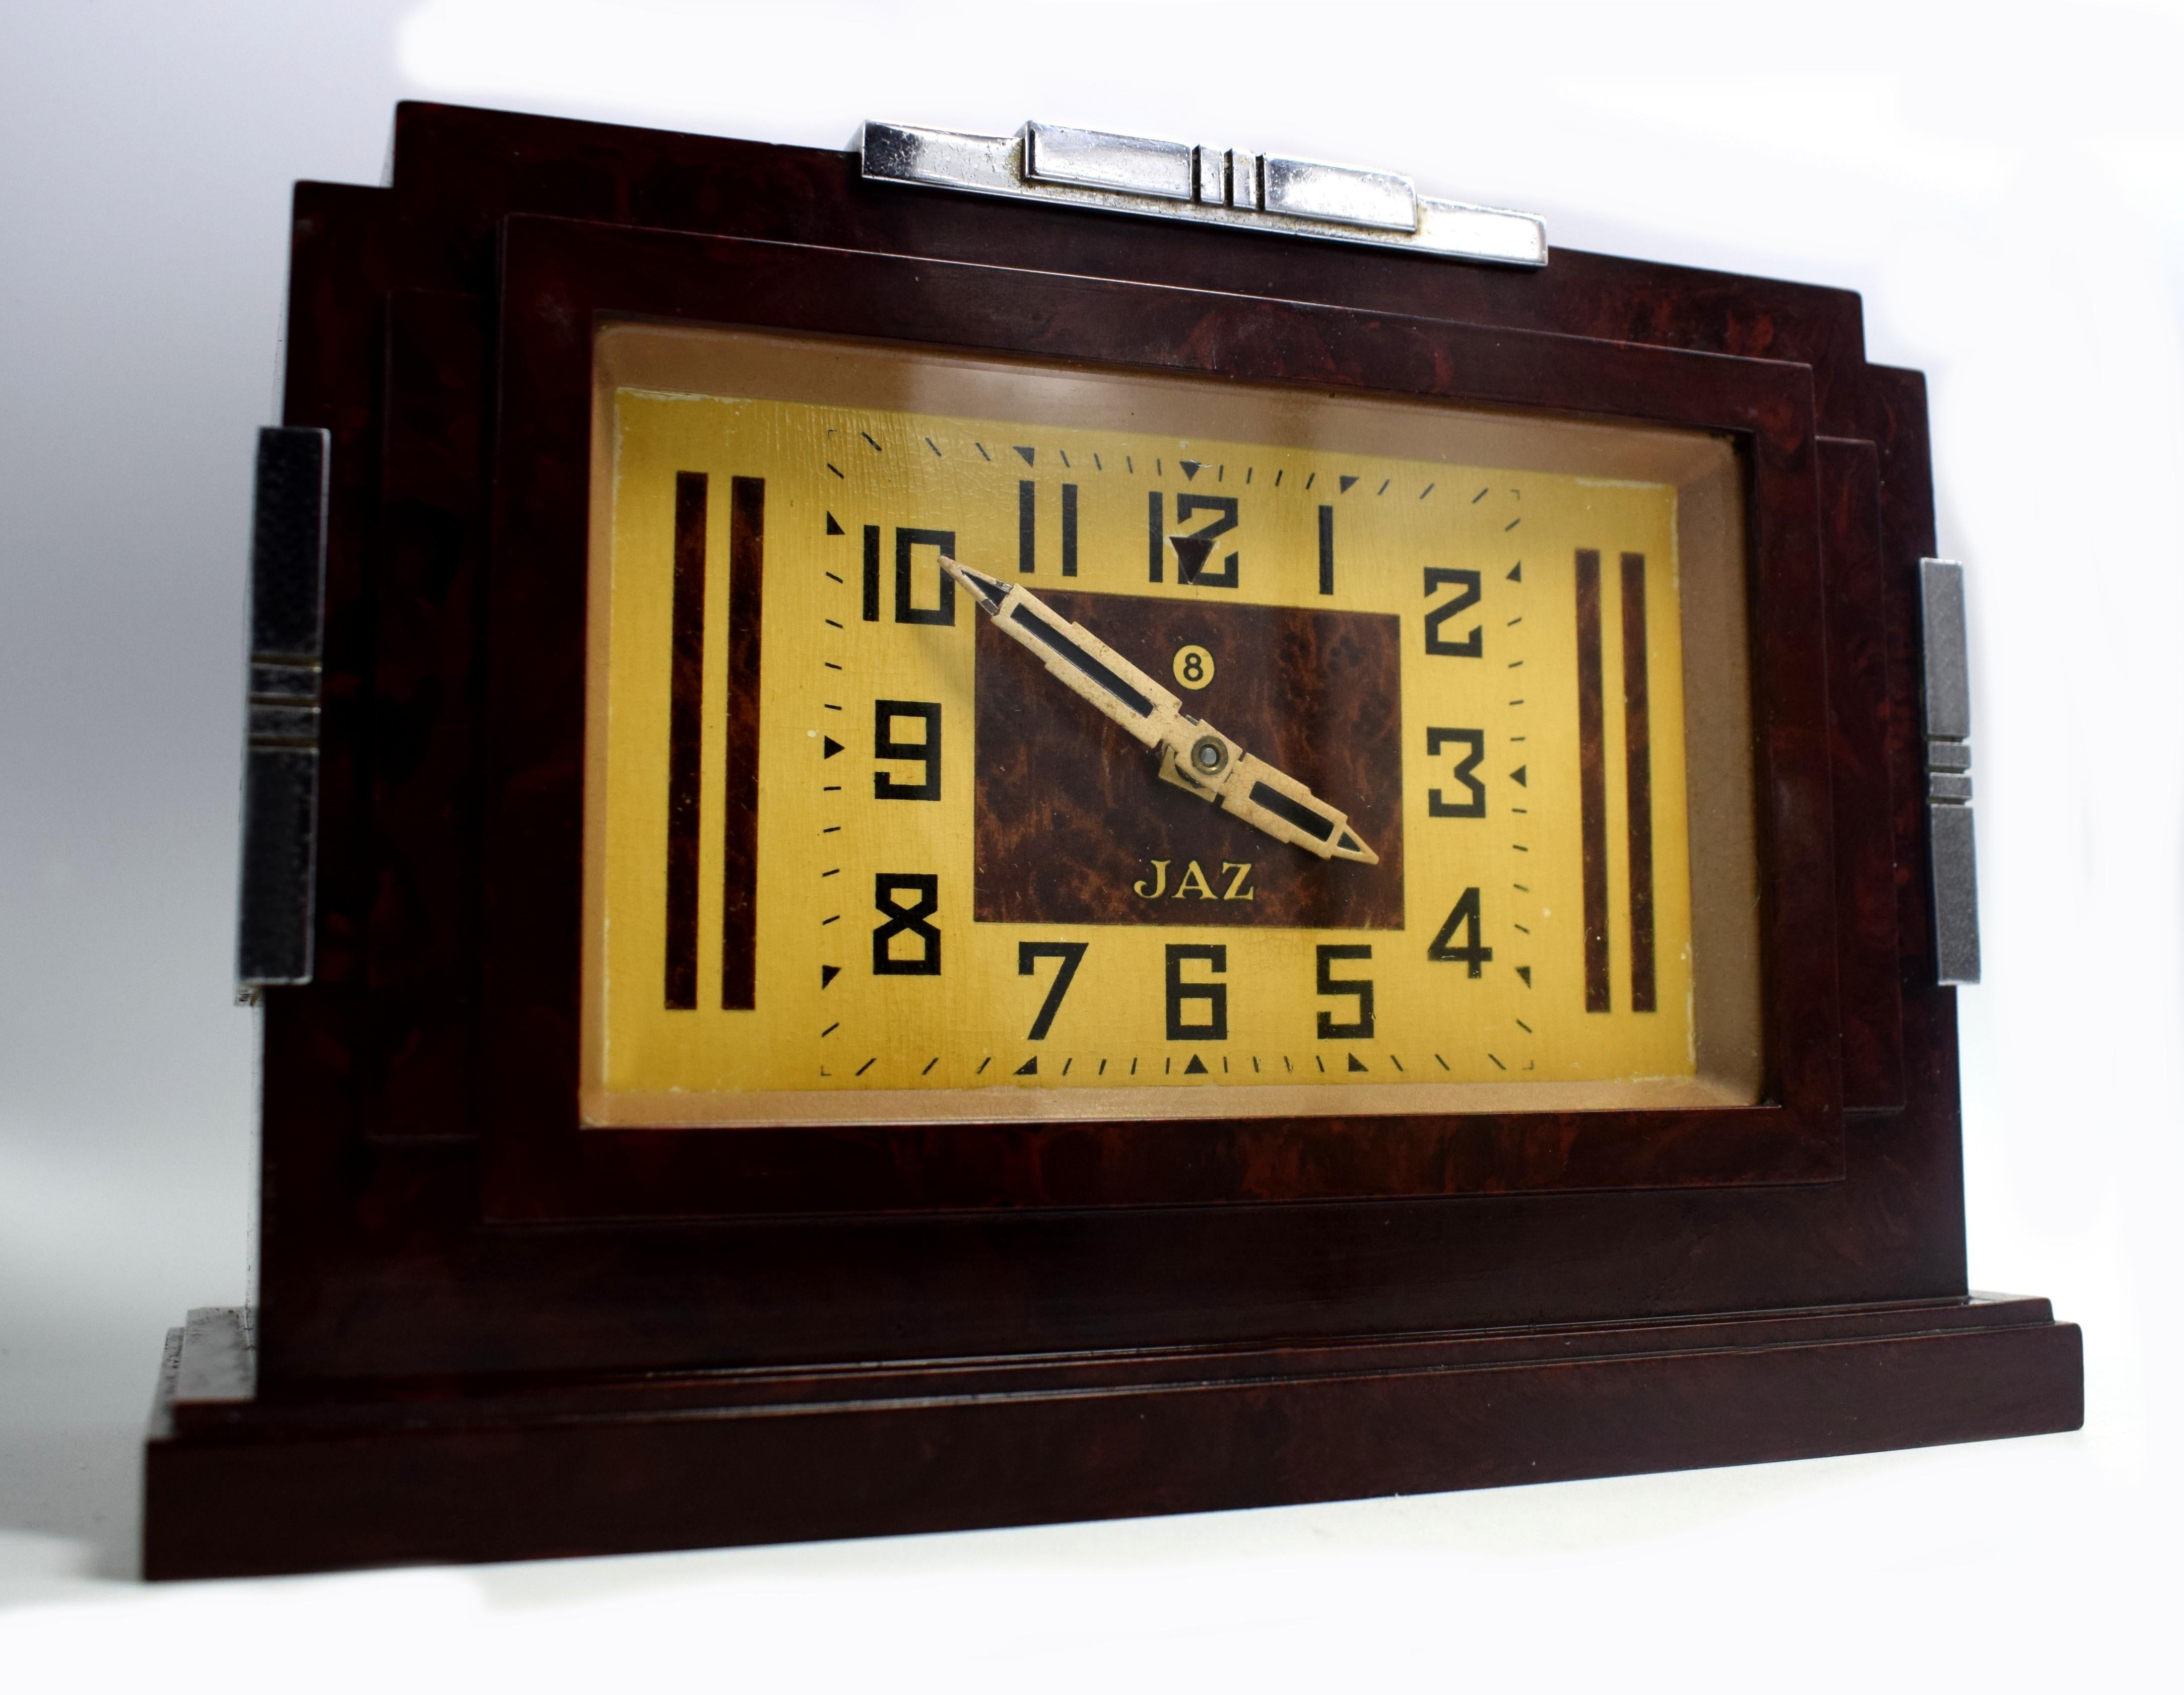 This is one of the daddies of JAZ Bakelite clocks 1930s . Made in France by the very collectable JAZ company, this clock screams everything about the Deco era we all love and admire, Industrial and modernist. The casing is a mottled deep red color,